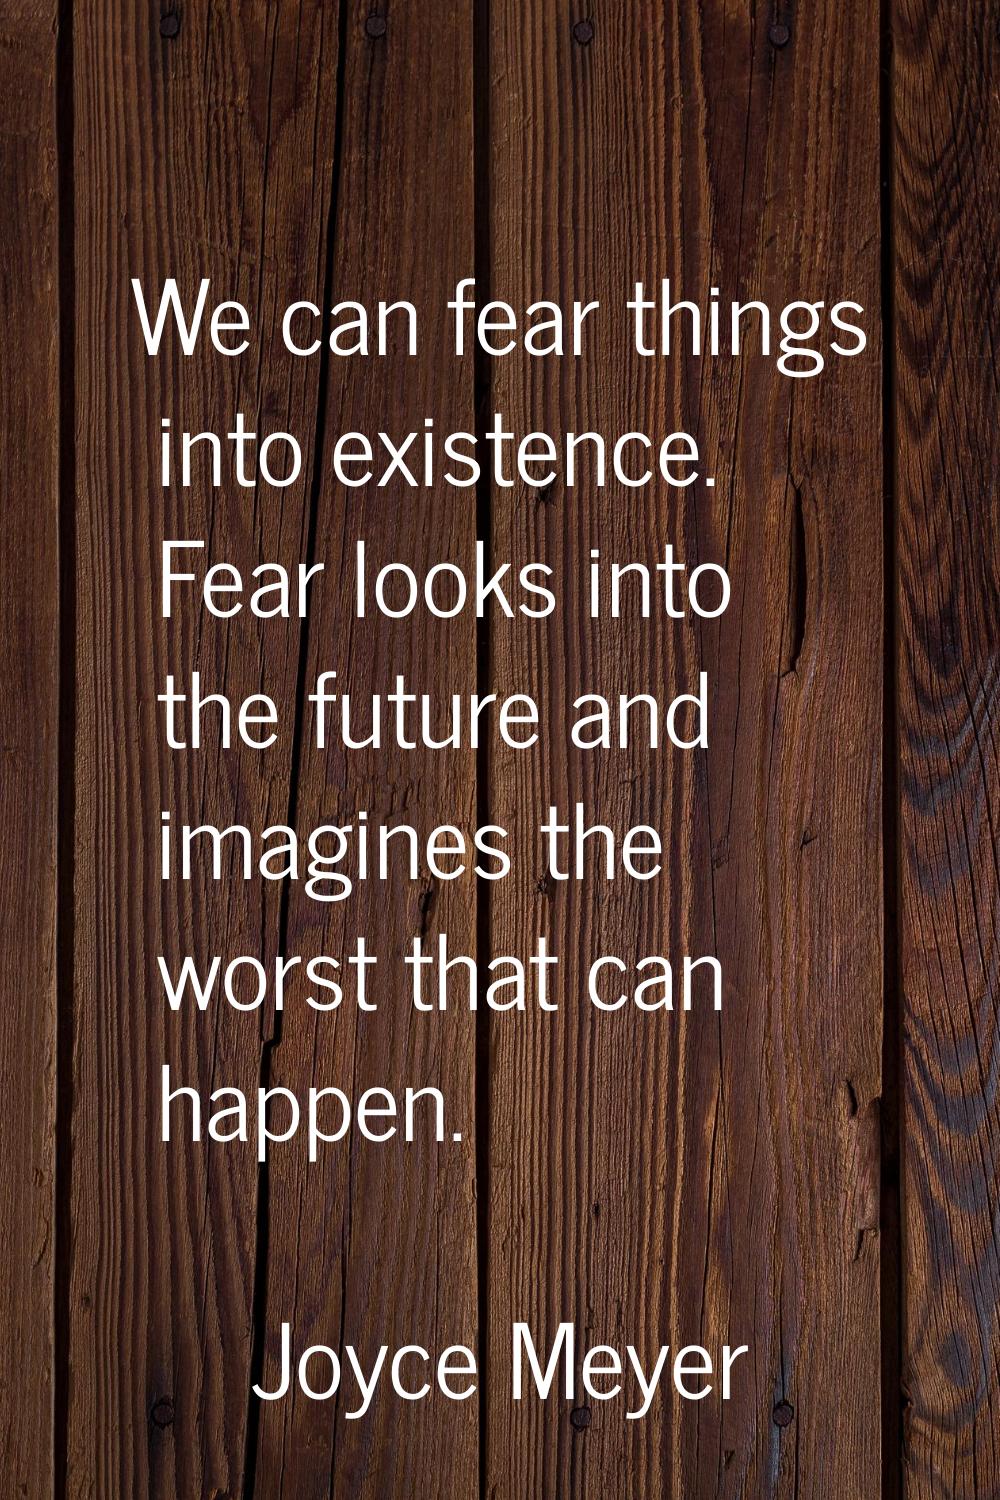 We can fear things into existence. Fear looks into the future and imagines the worst that can happe